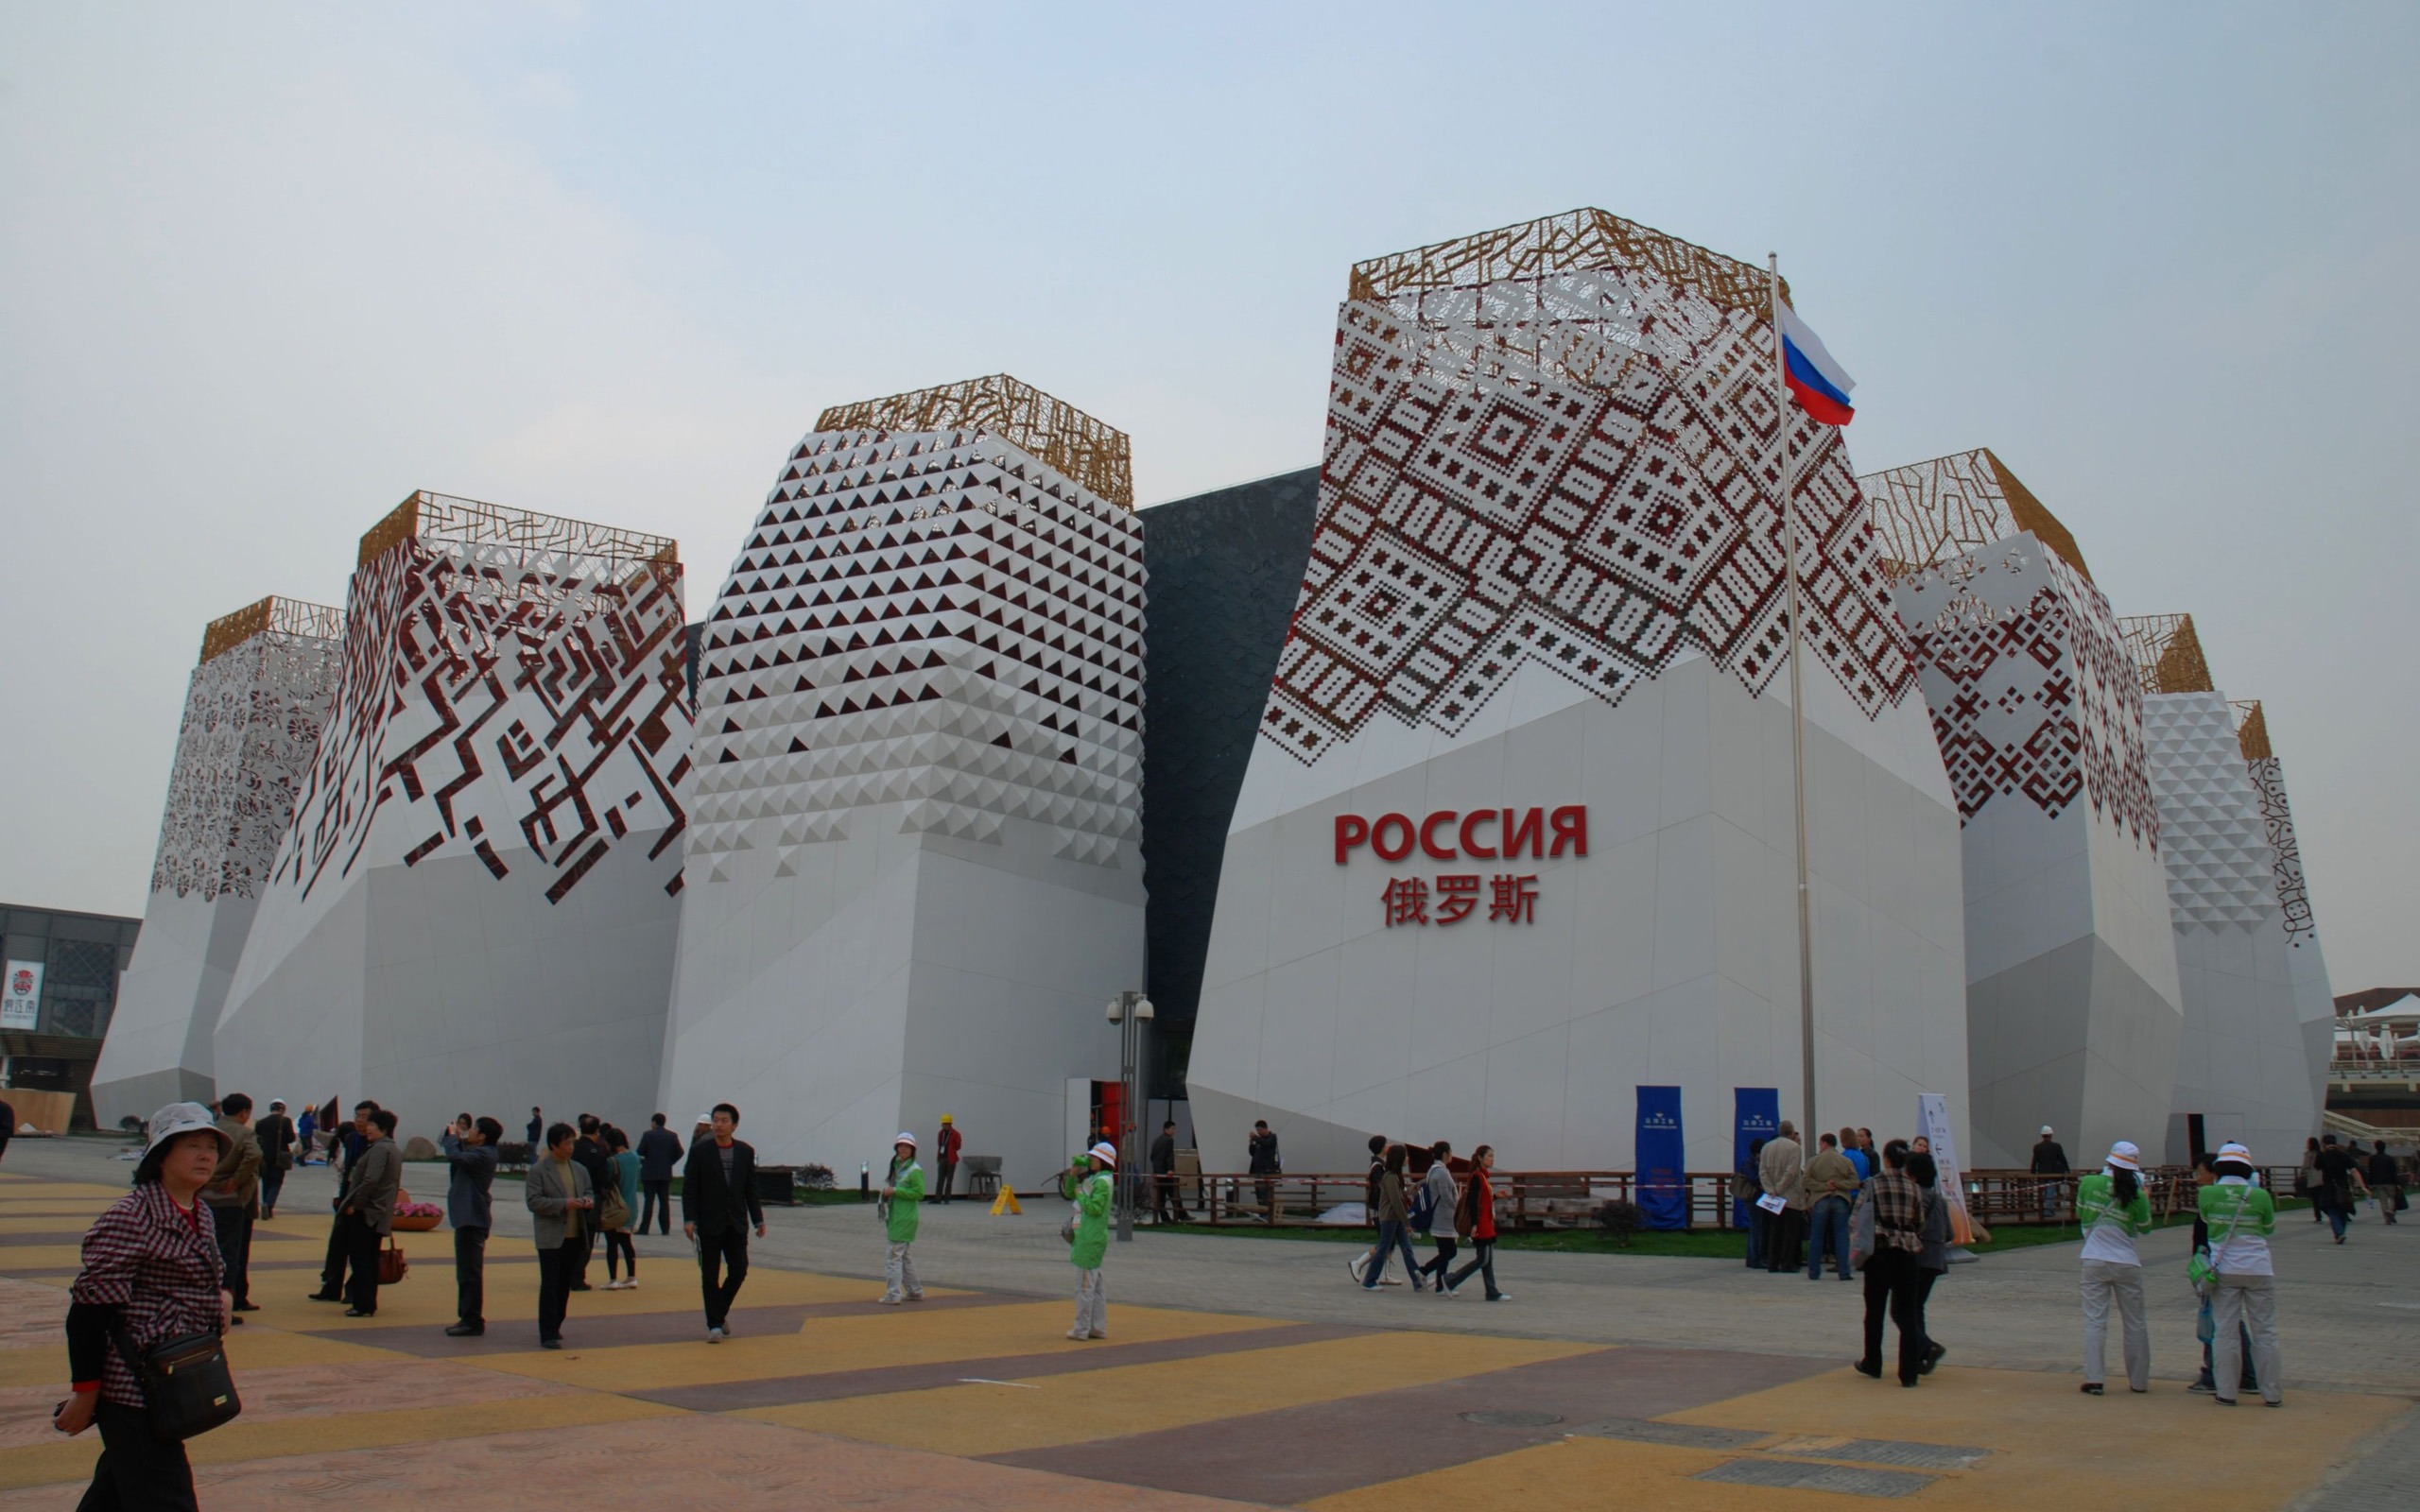 Commissioning of the 2010 Shanghai World Expo (studious works) #20 - 2560x1600